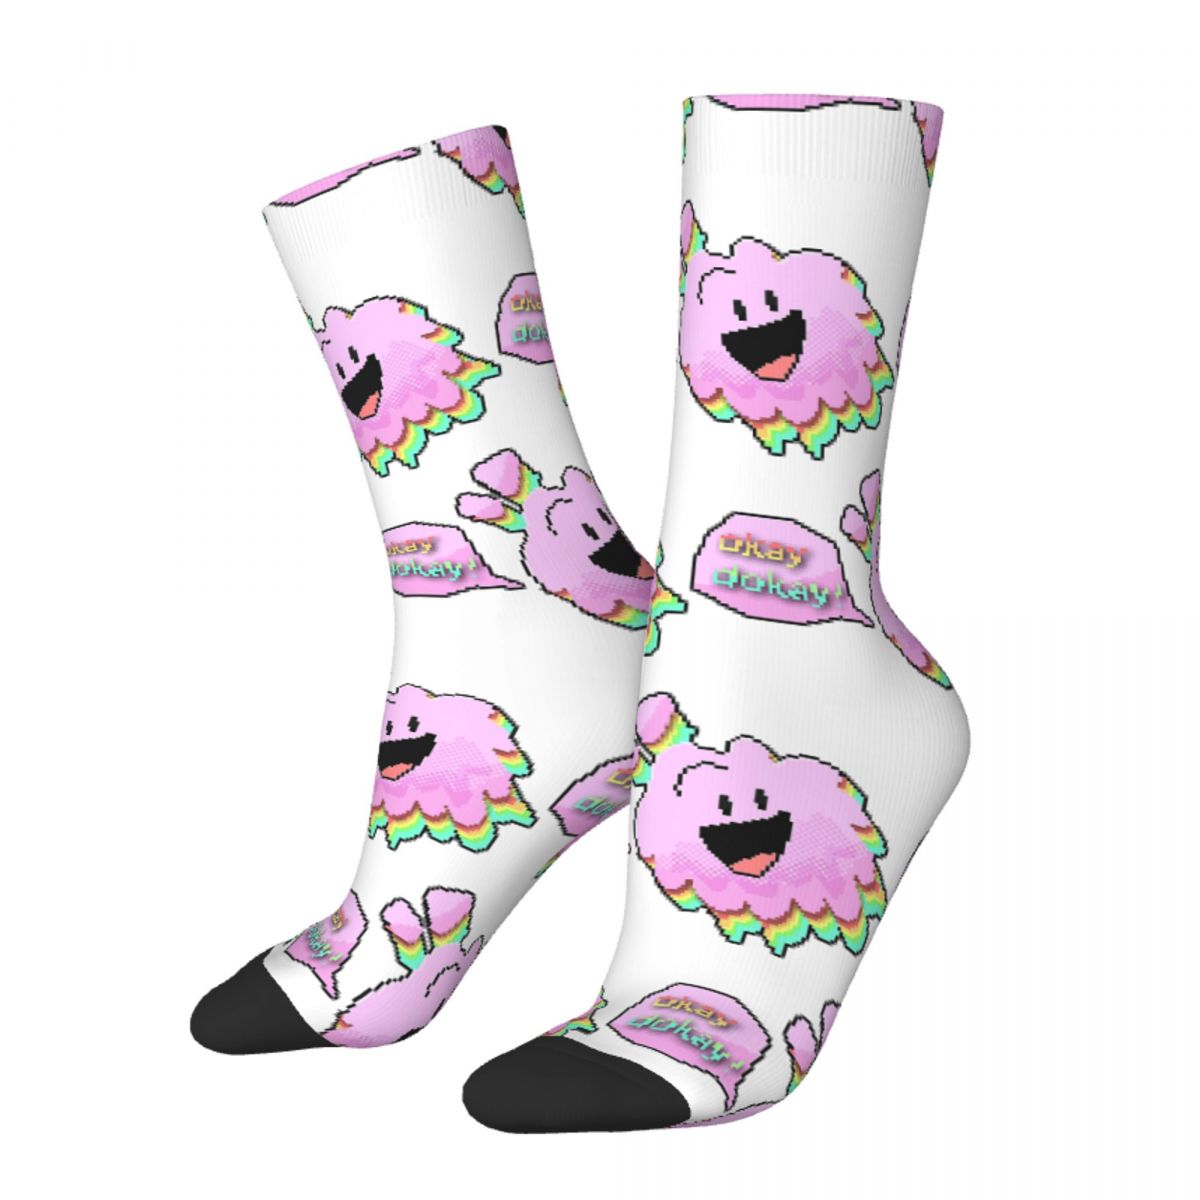 Funny Crazy Sock for Men Pixel Art Bfb Puffball Hip Hop Vintage Battle for Dream Island 1 - BFDI Plush